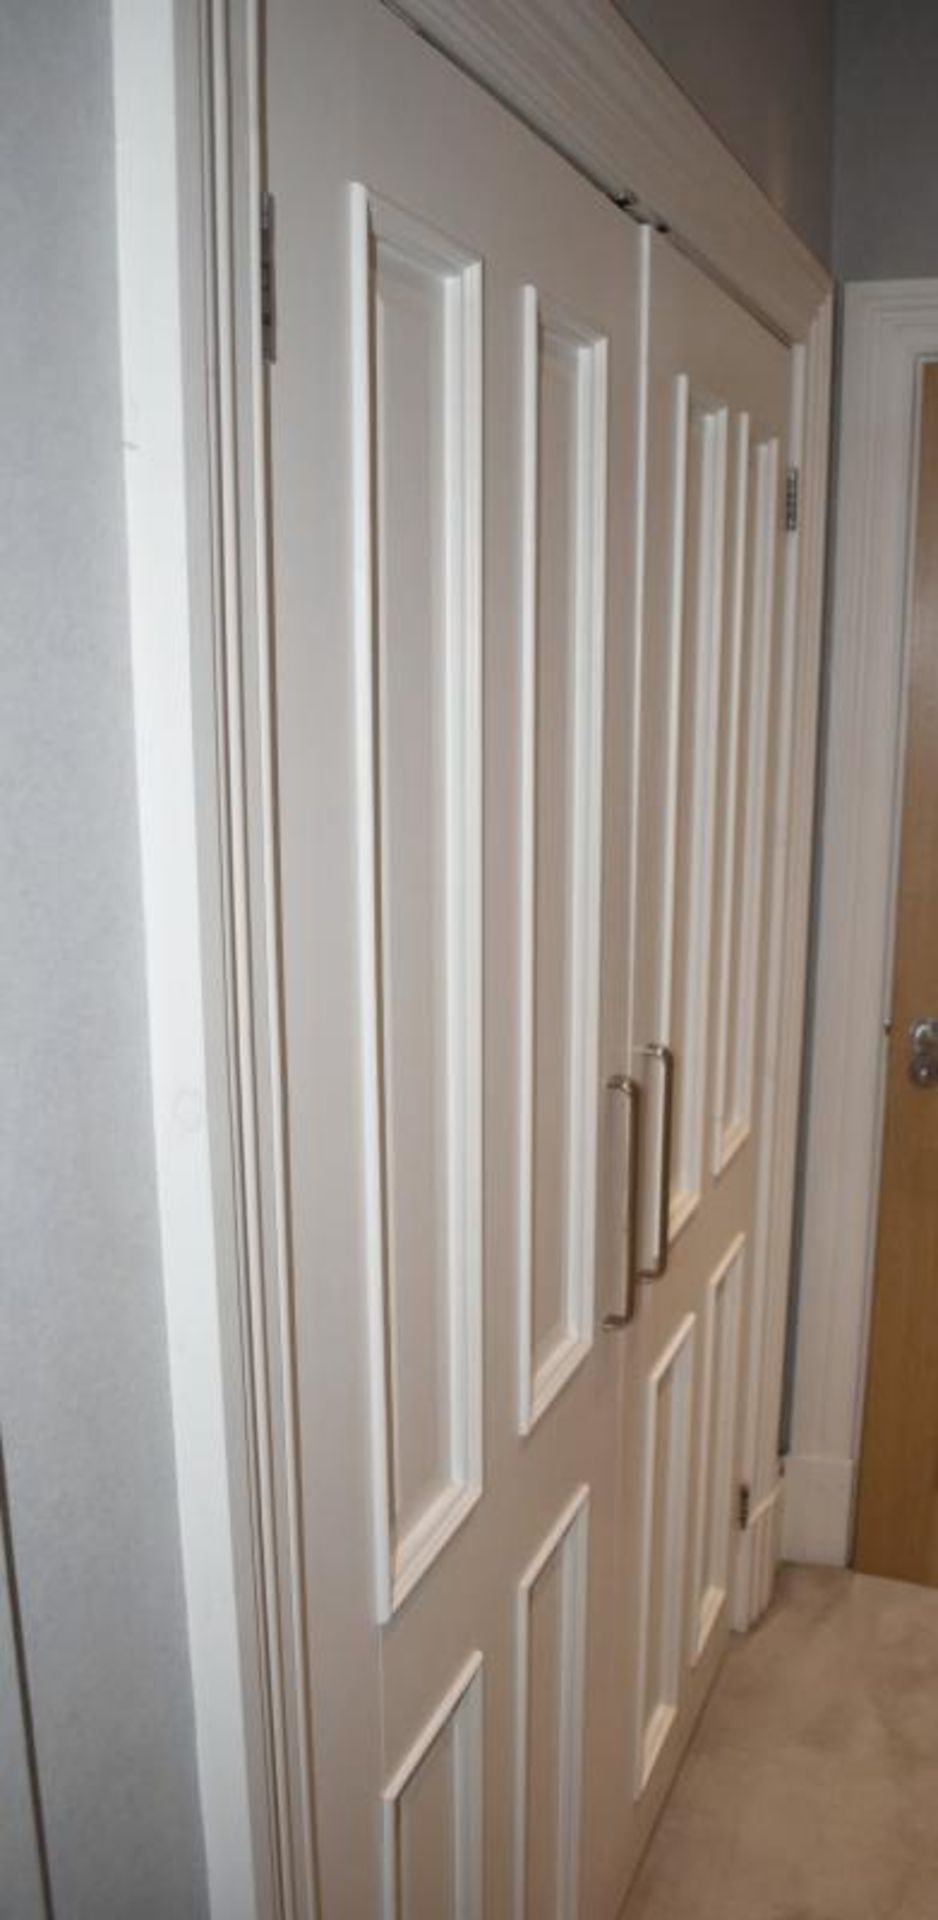 2 x Double Door Built-in Wardrobes In White - Dimensions Of Both: W136 x H195 x D40cm - Ref: ABR060 - Image 2 of 5